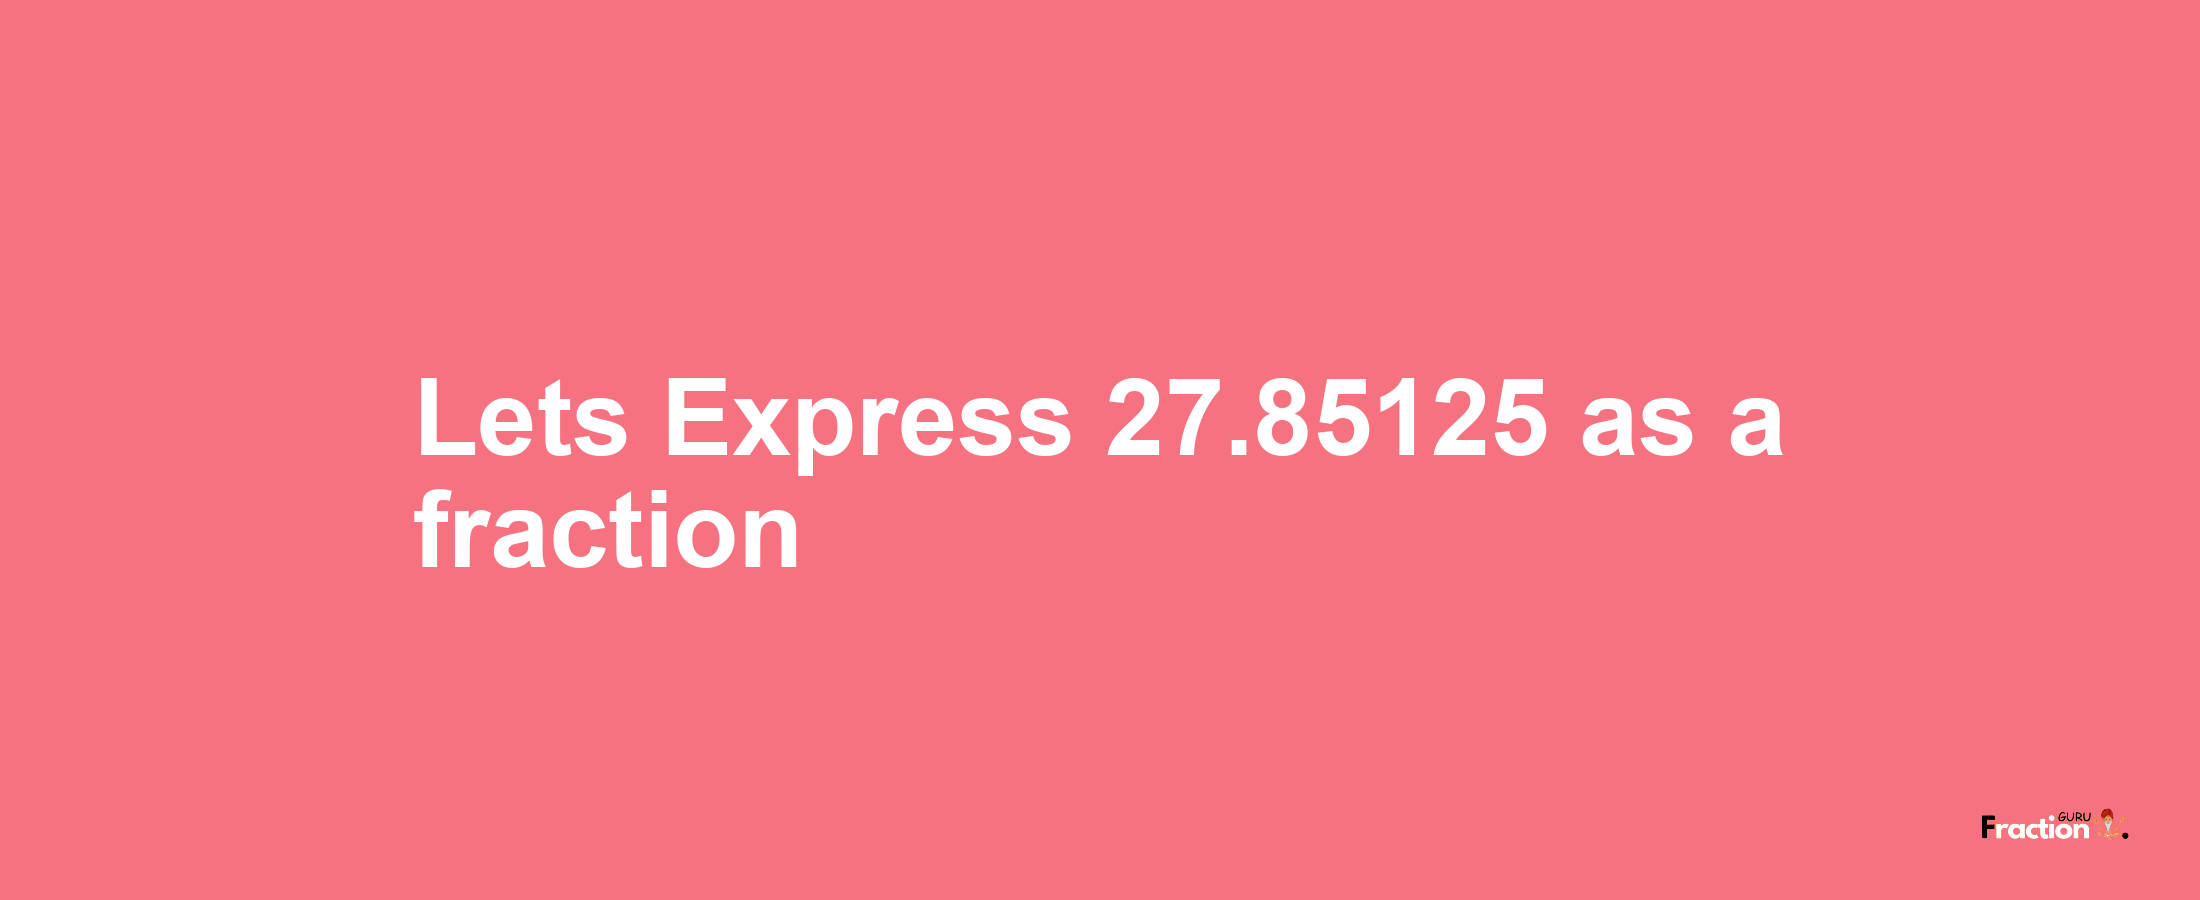 Lets Express 27.85125 as afraction